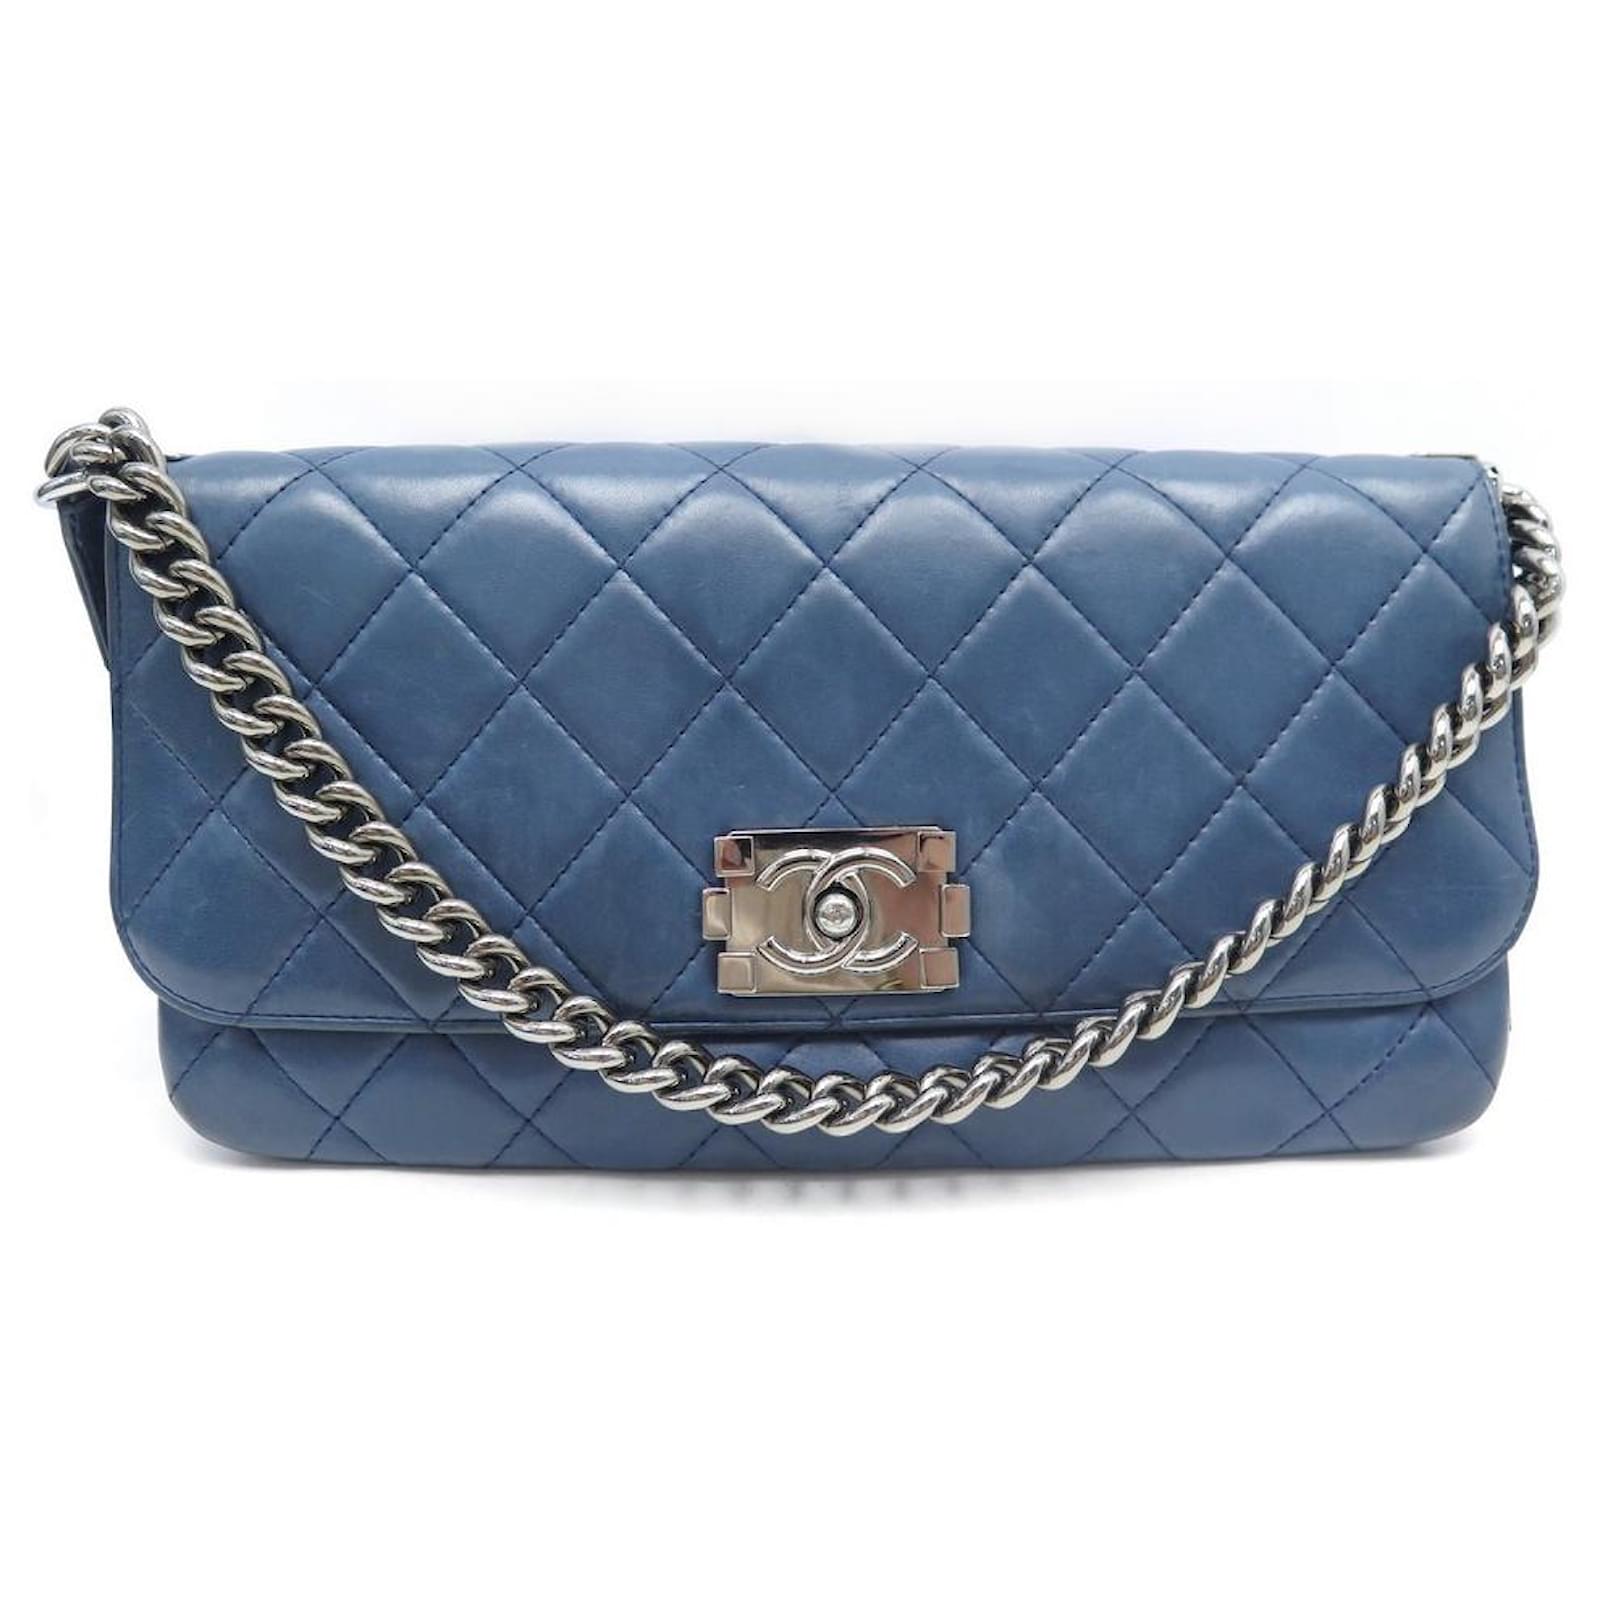 The Global Luxury Closet   Chanel Series 22 Cobalt Blue Calf Skin  Chevron Ruthenium hardware Old Medium Boy bag Condition Kept unused  immaculate condition  Comes with Box Dust bag